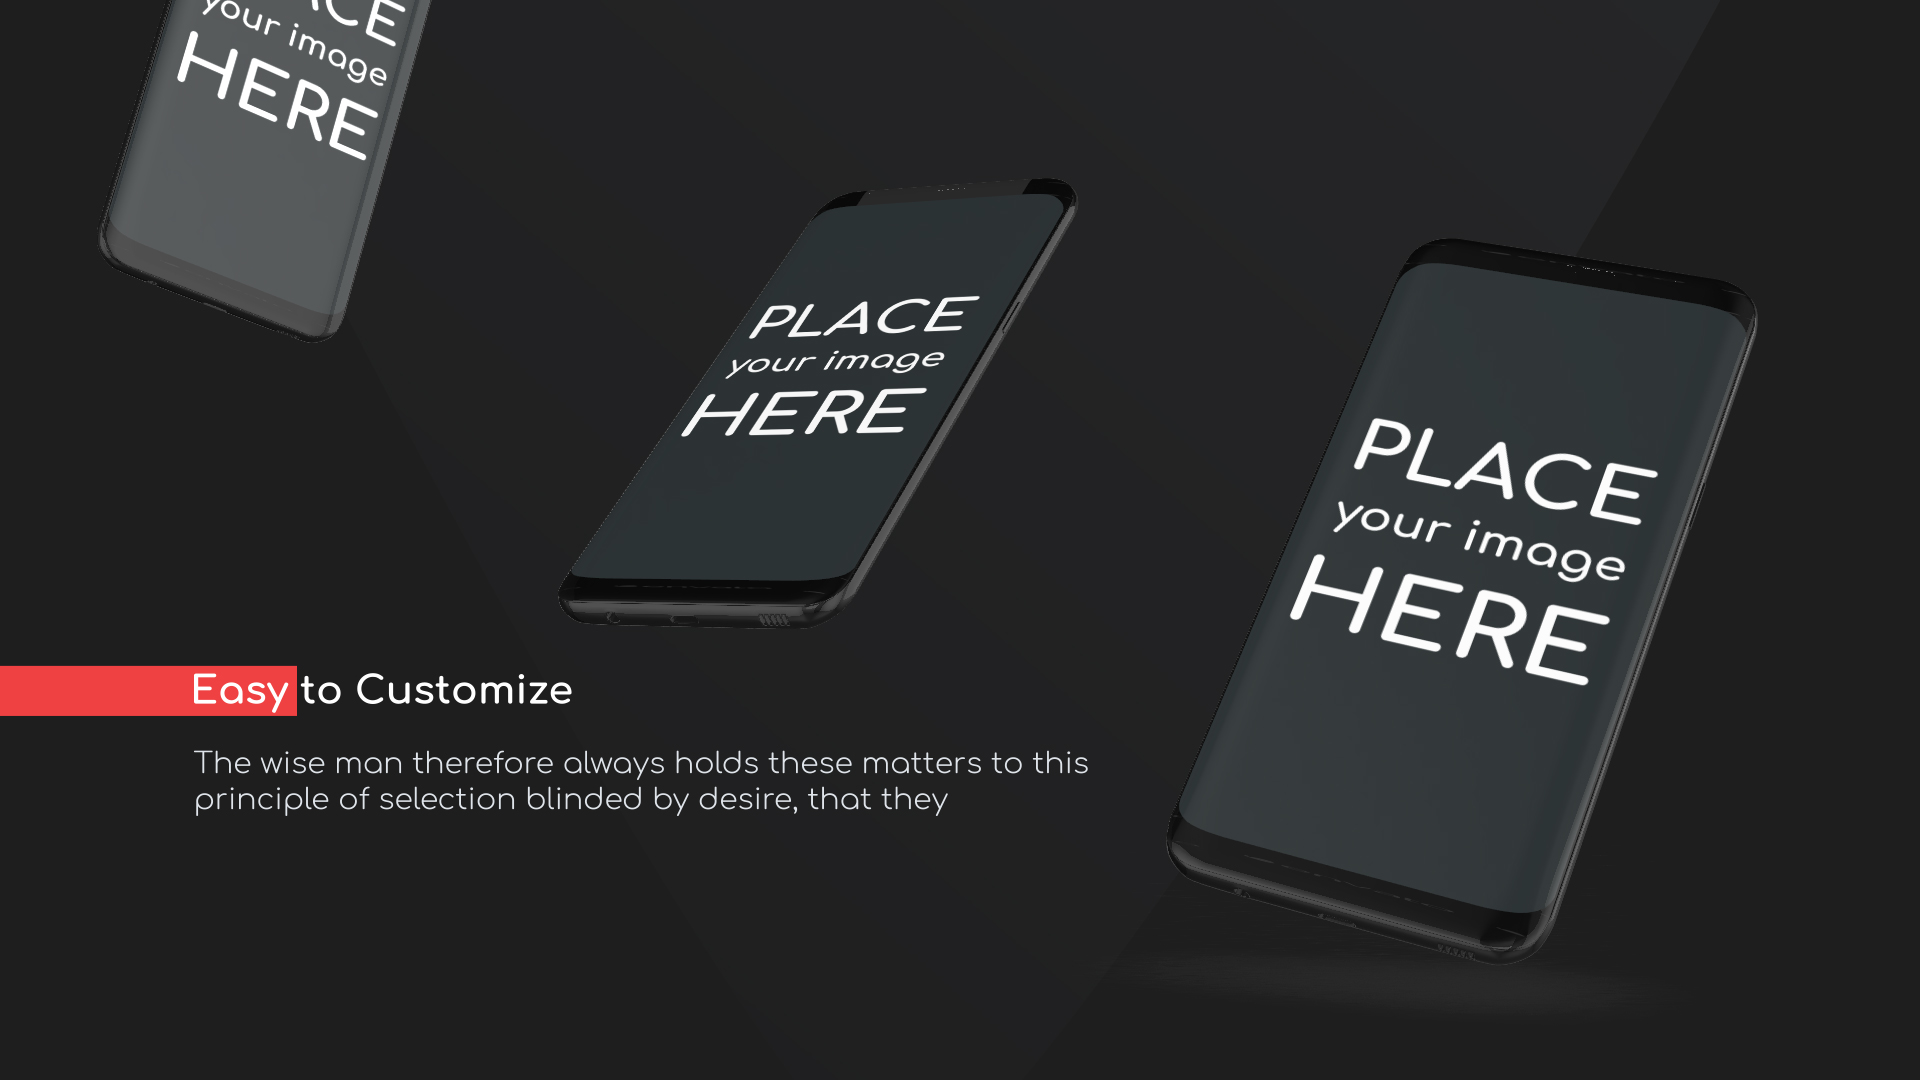  Android App Promo - Phone Mockup 